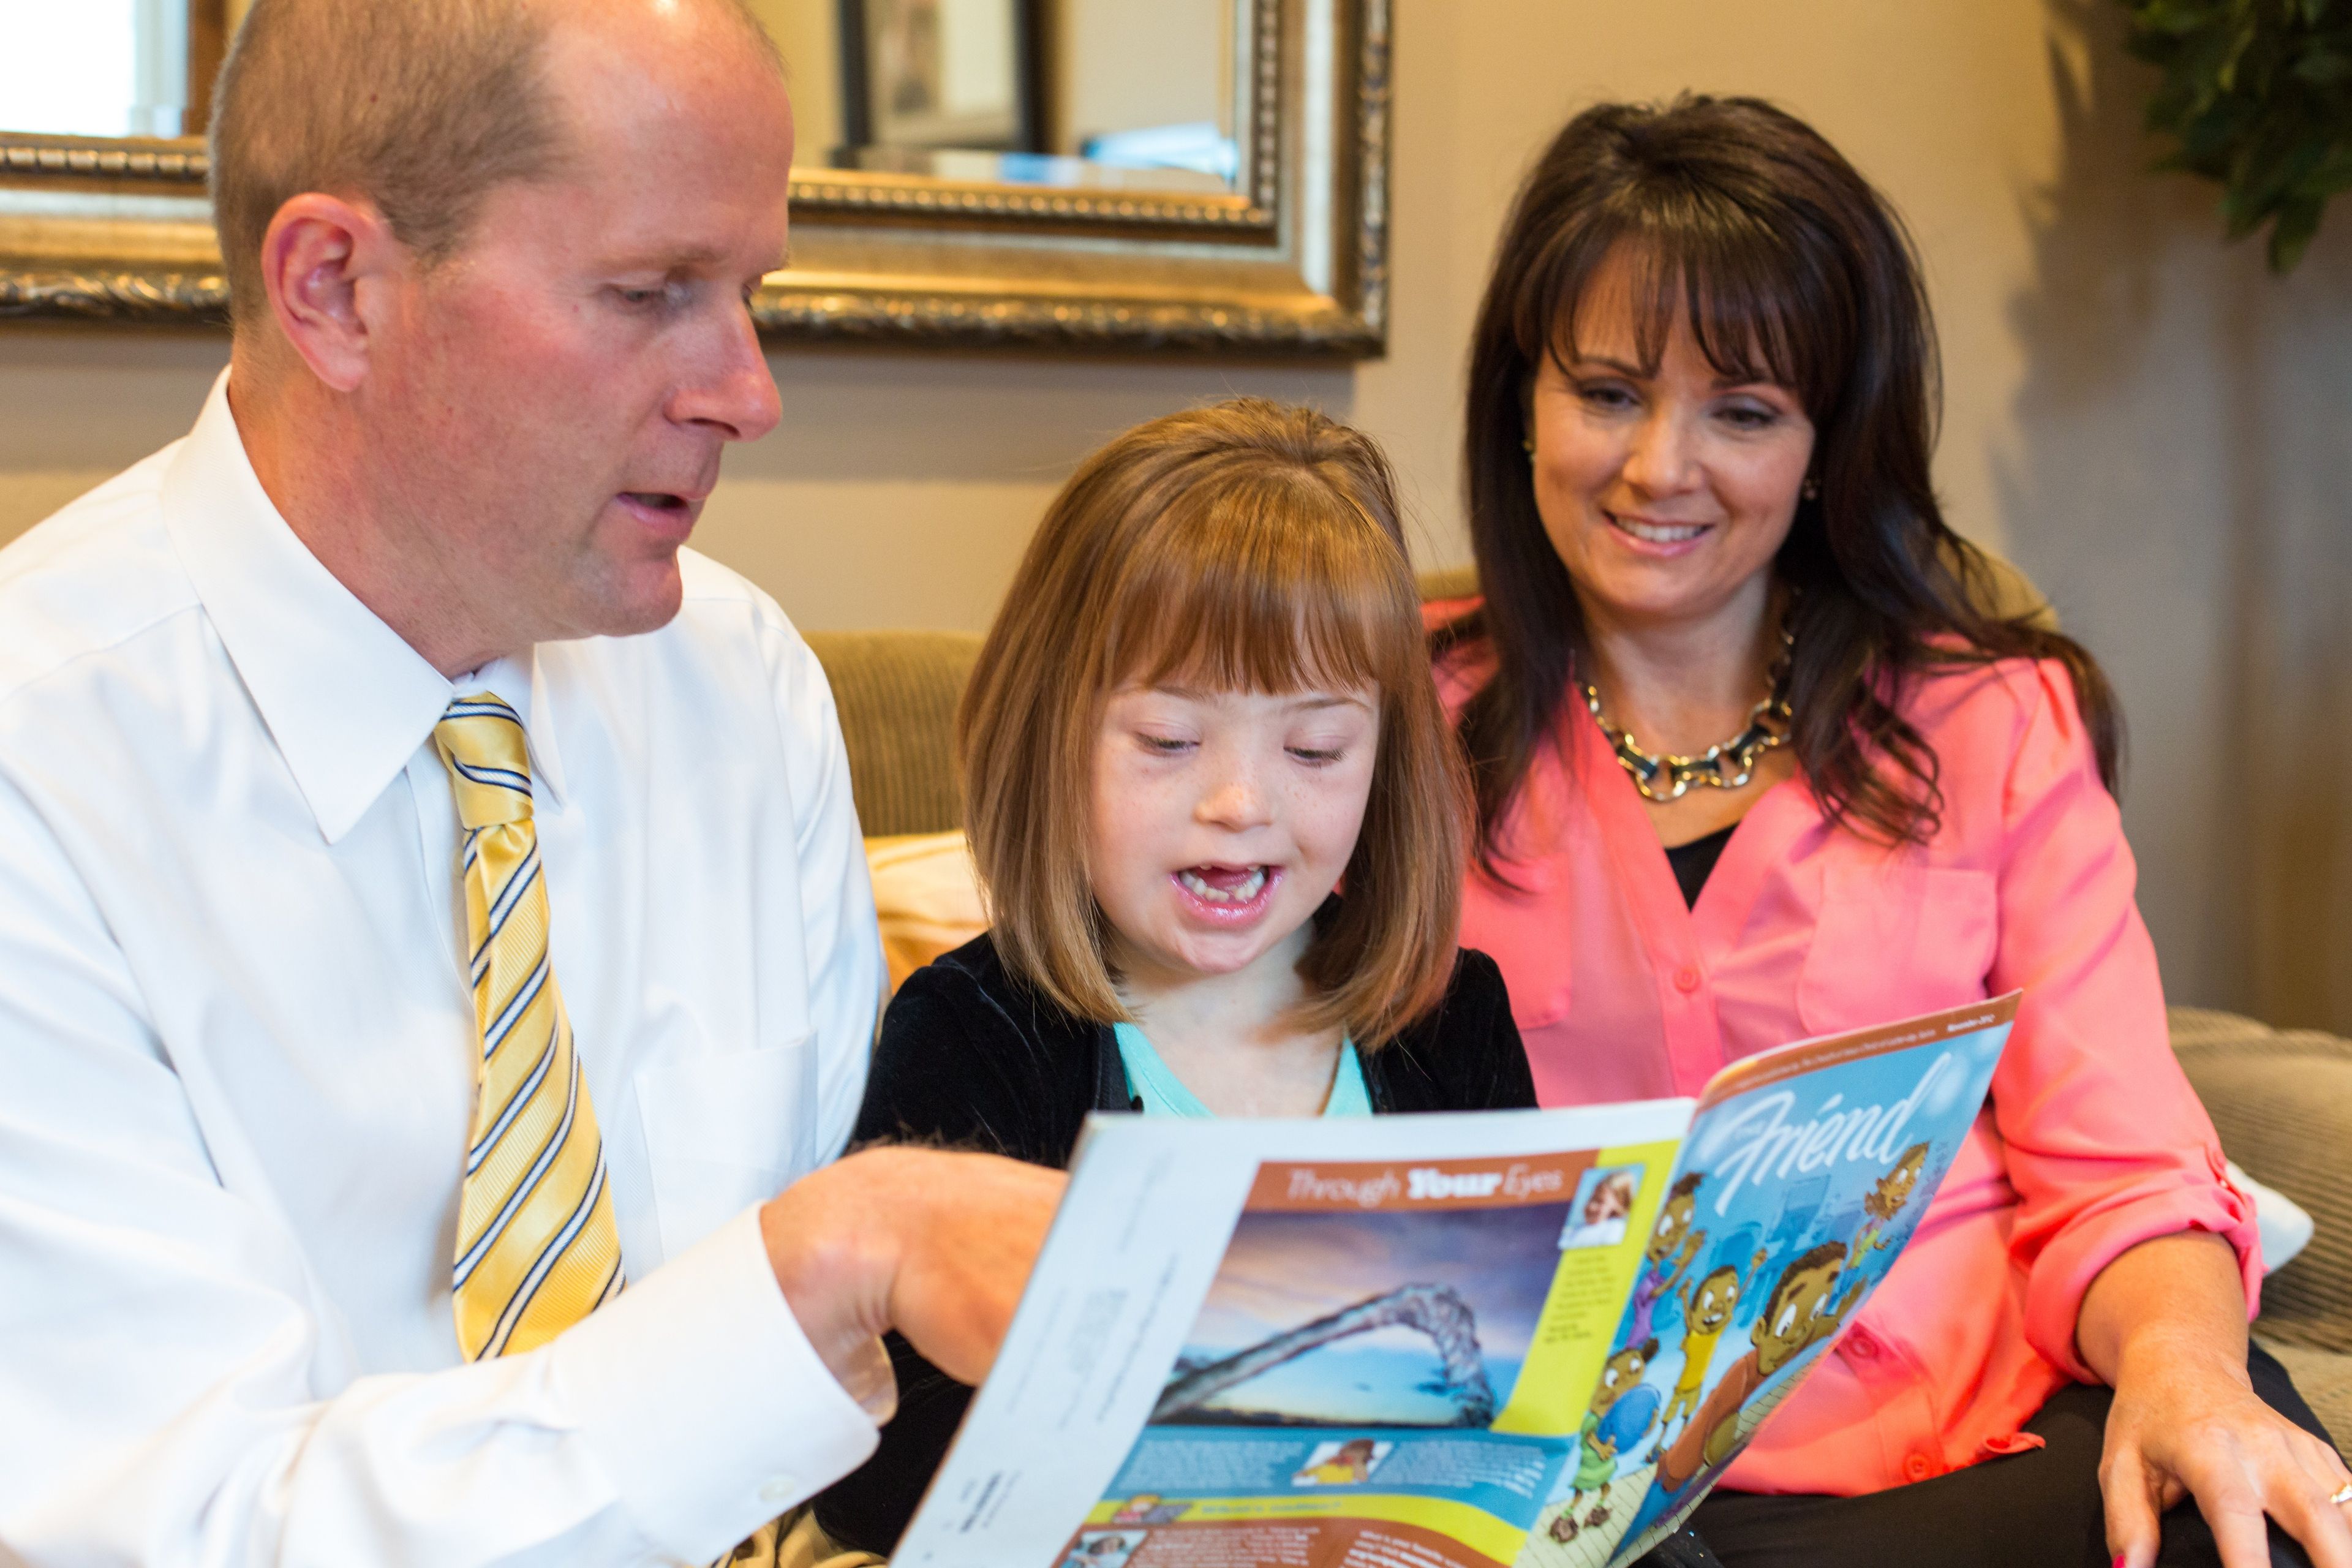 A mother and father read the Friend magazine with their young daughter.